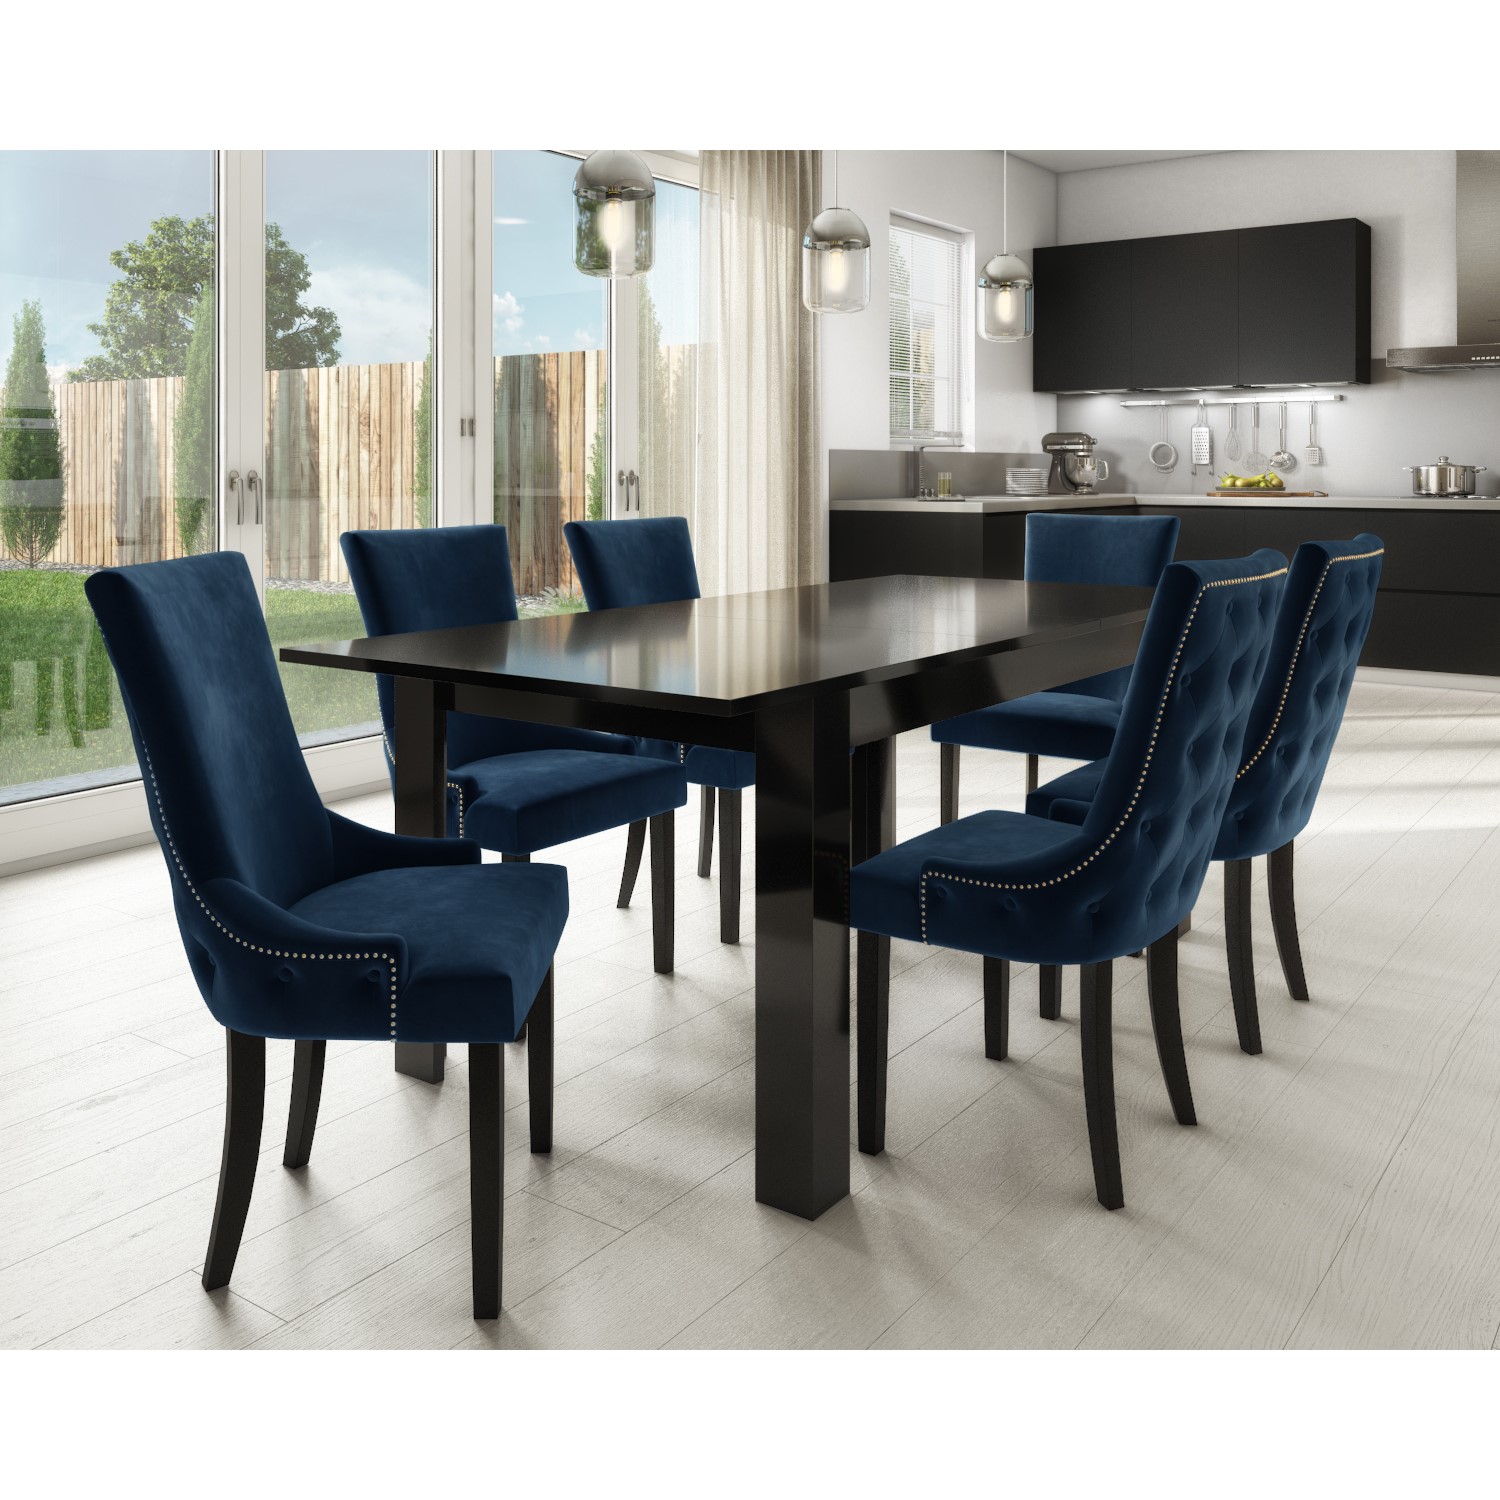 Dining Table Sets On Sale : Amazon Com Mecor Dining Table Set 5 Piece Kitchen Table Set With Glass Table Top 4 Leather Chairs Dinette Black Table Chair Sets : Select one in a natural color or go with painted white for a brighter look.